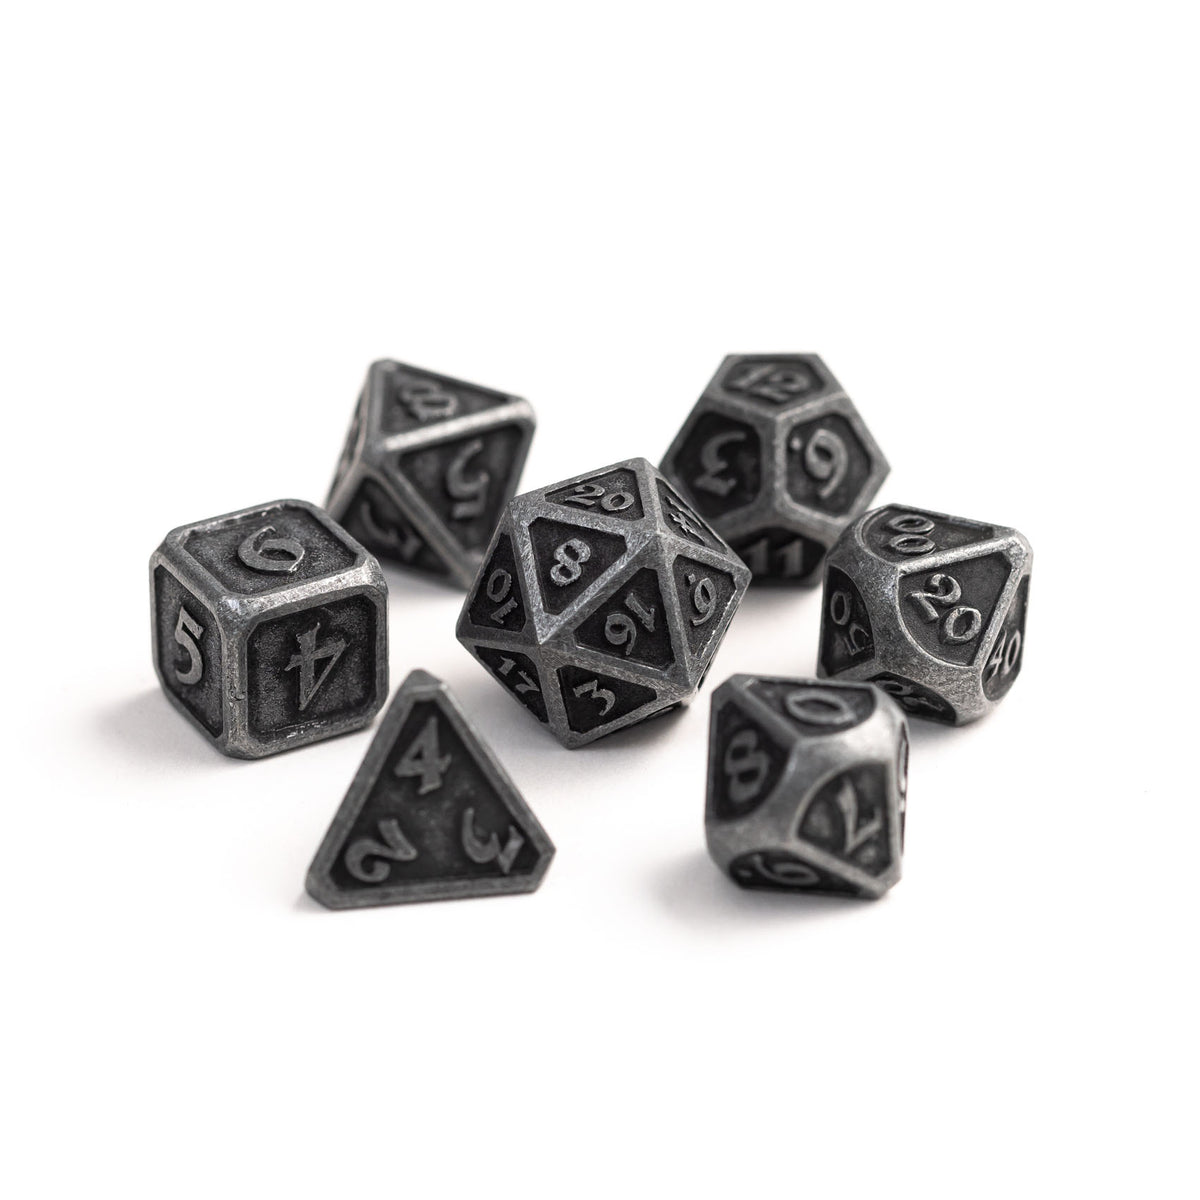 Metal Dice Set - Mythica Dark Iron from Die Hard Dice - mysterious and deep as a moonlit cemetery